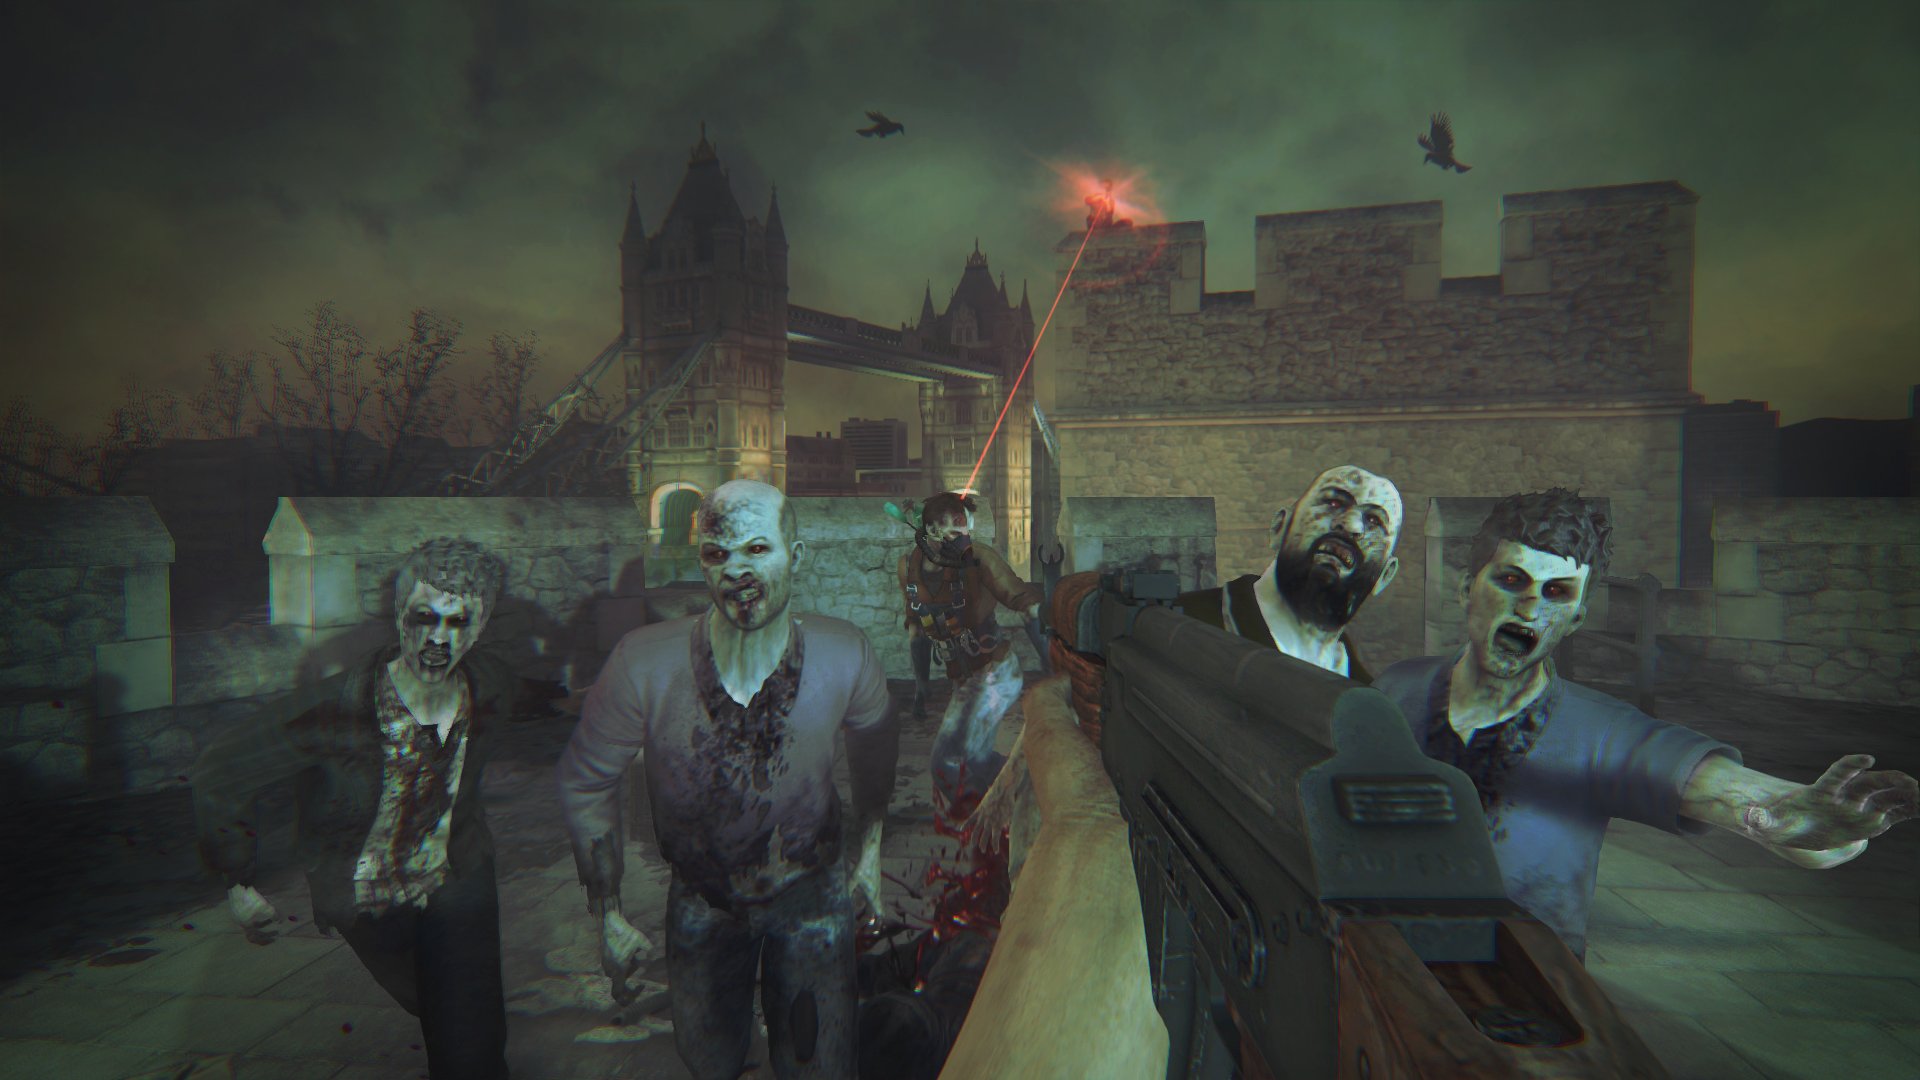 free pc zombie survival games download